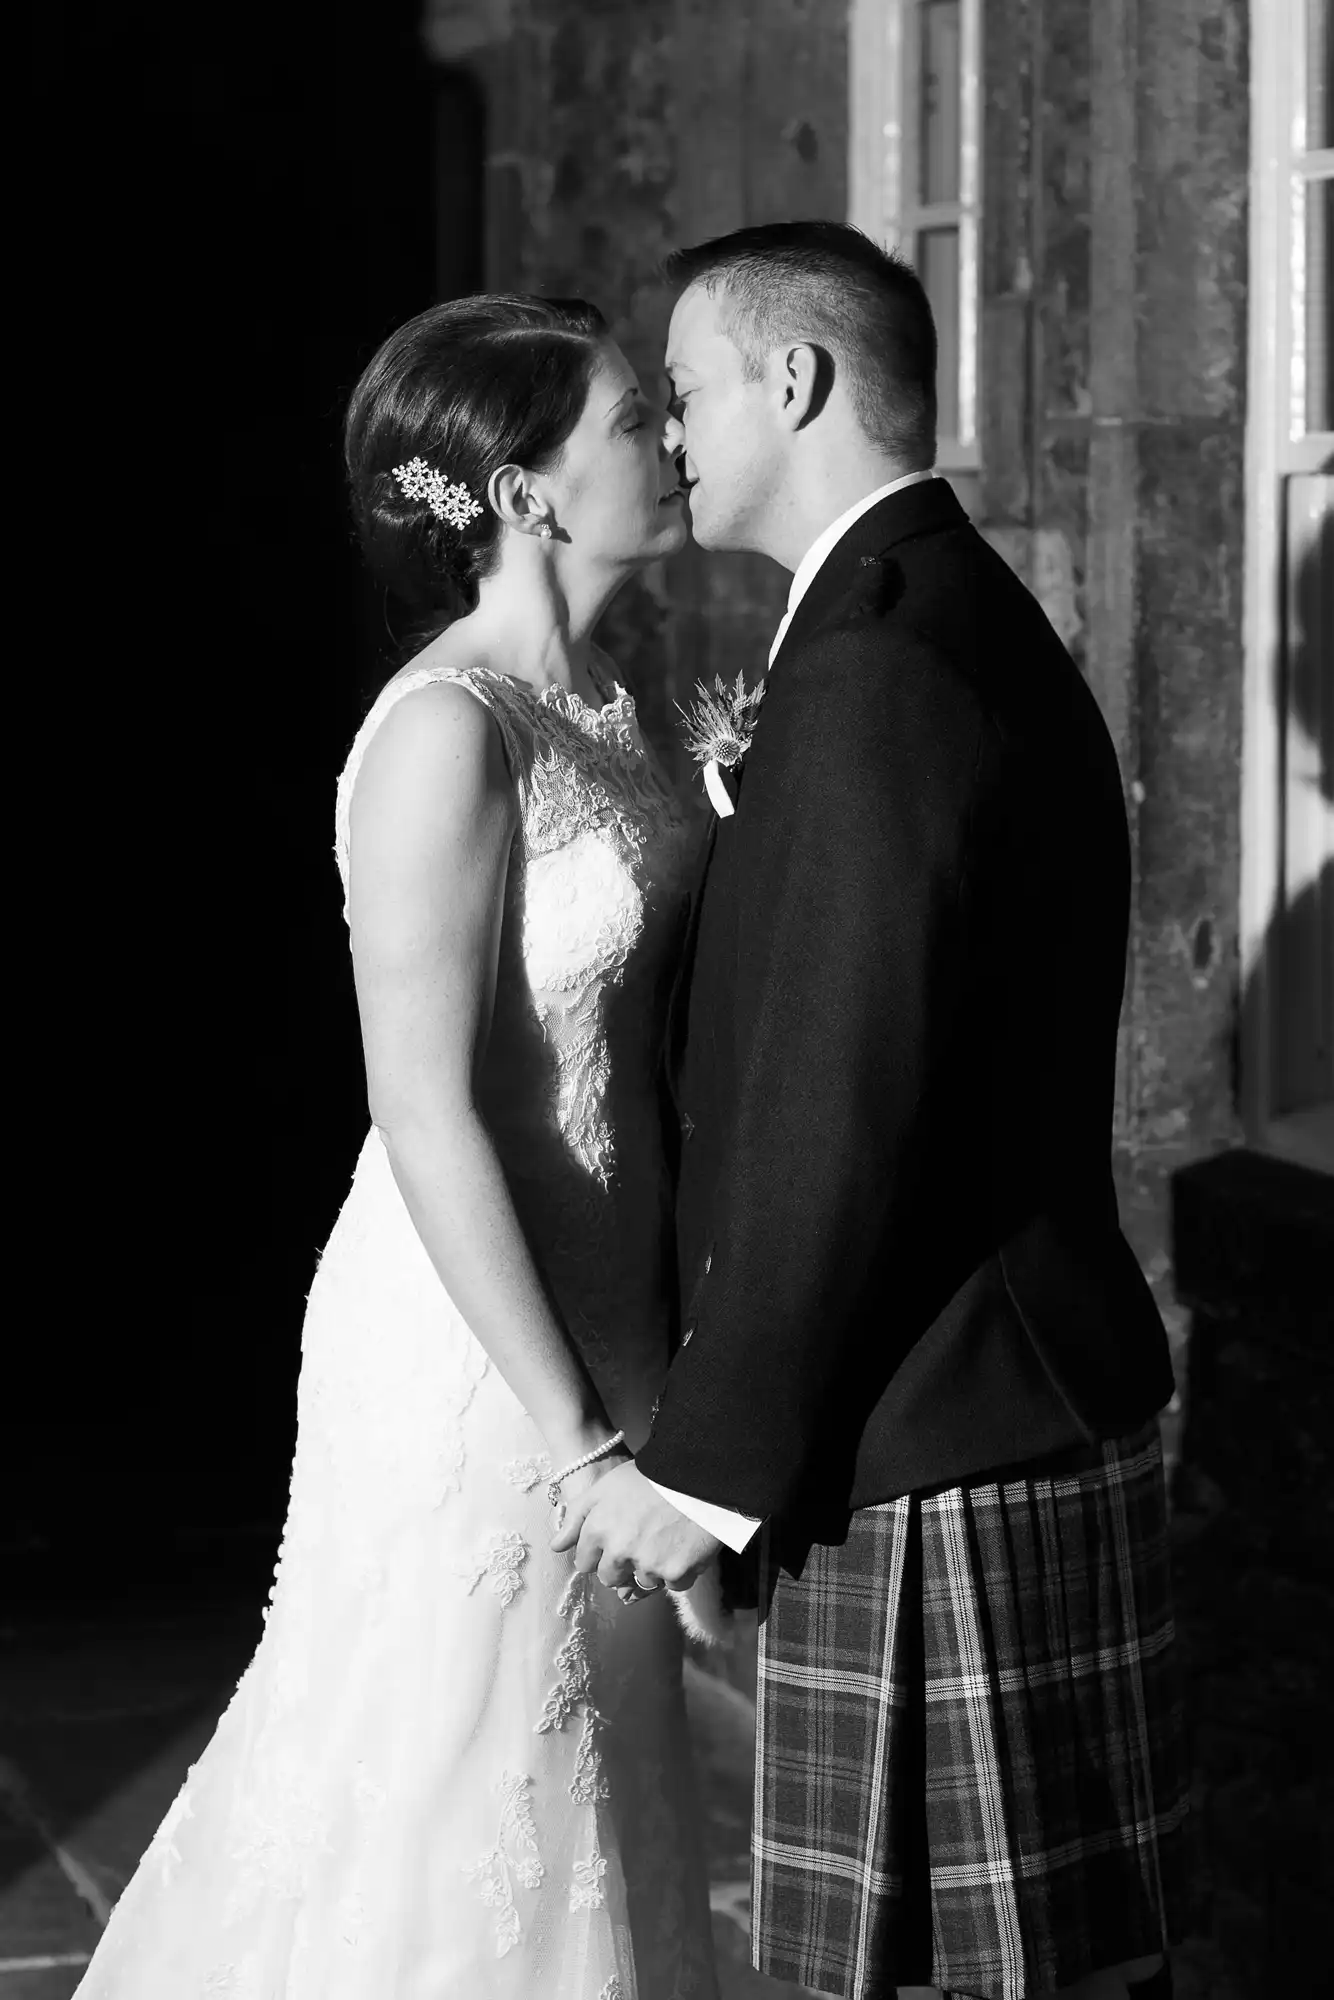 A bride and groom, dressed in formal wedding attire, share a close moment, almost kissing, in dramatic black and white lighting.